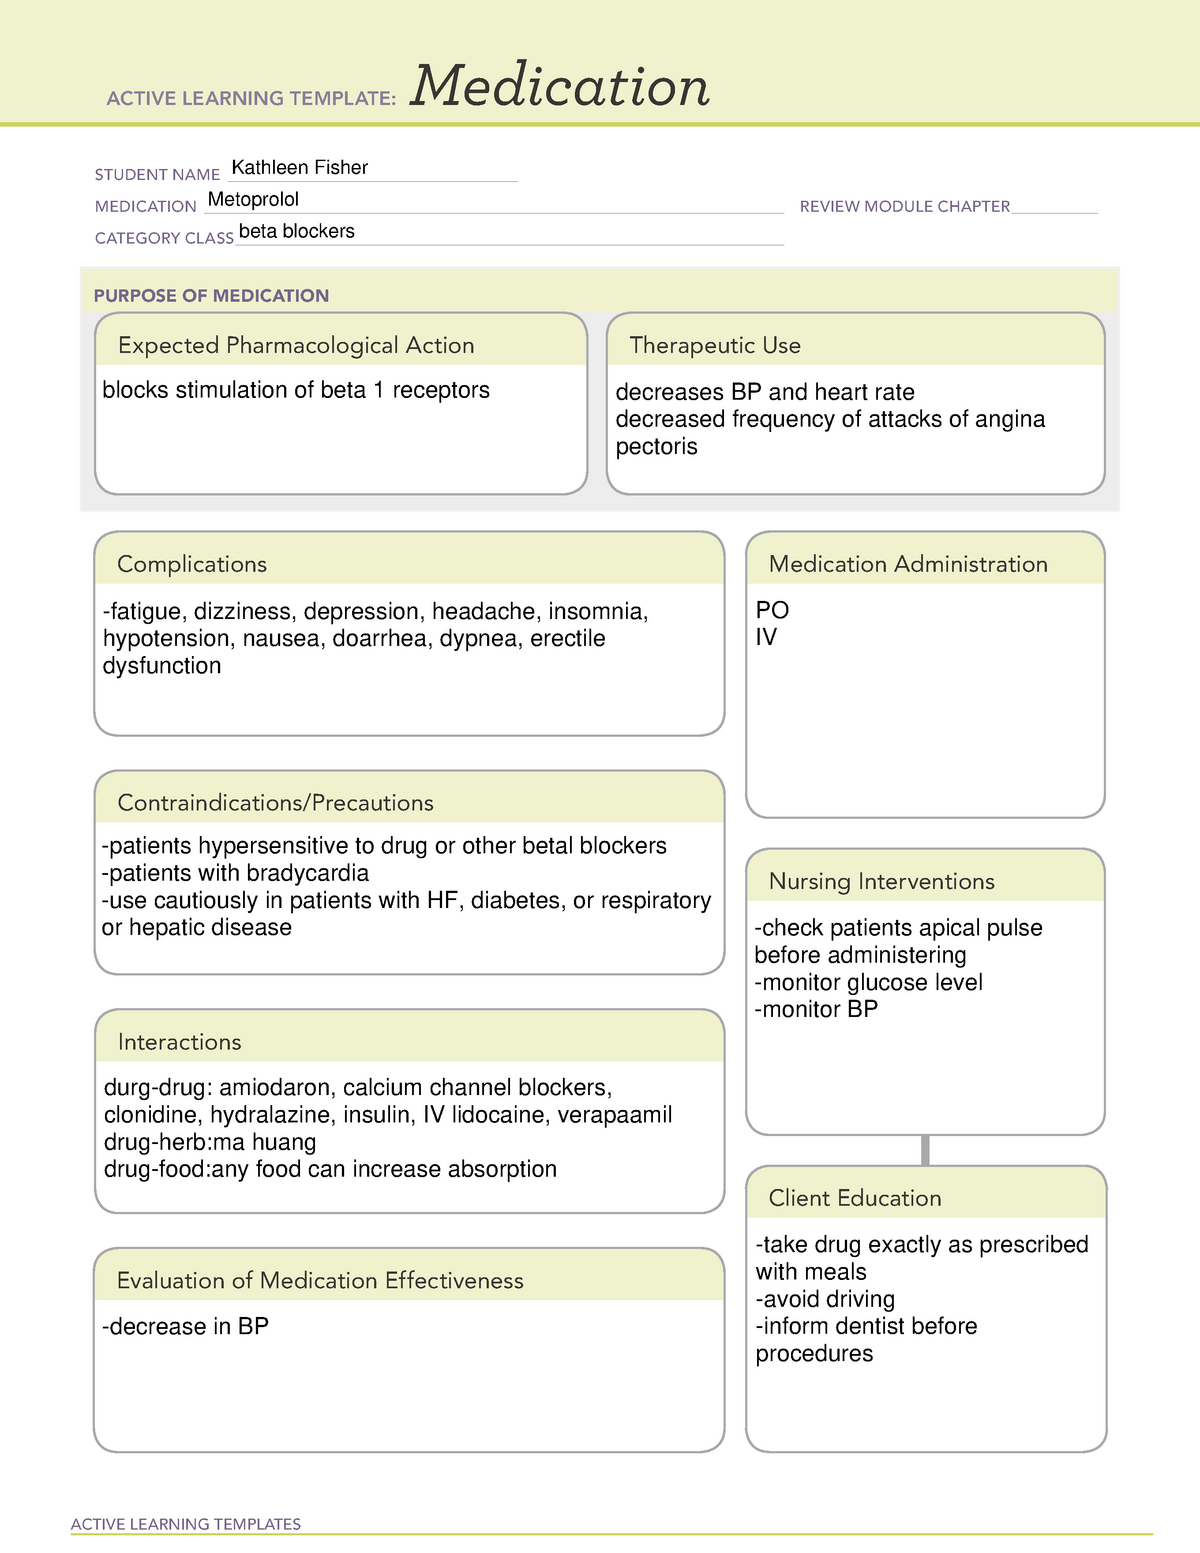 Medtemp metoprolol ATI medication/system template ACTIVE LEARNING